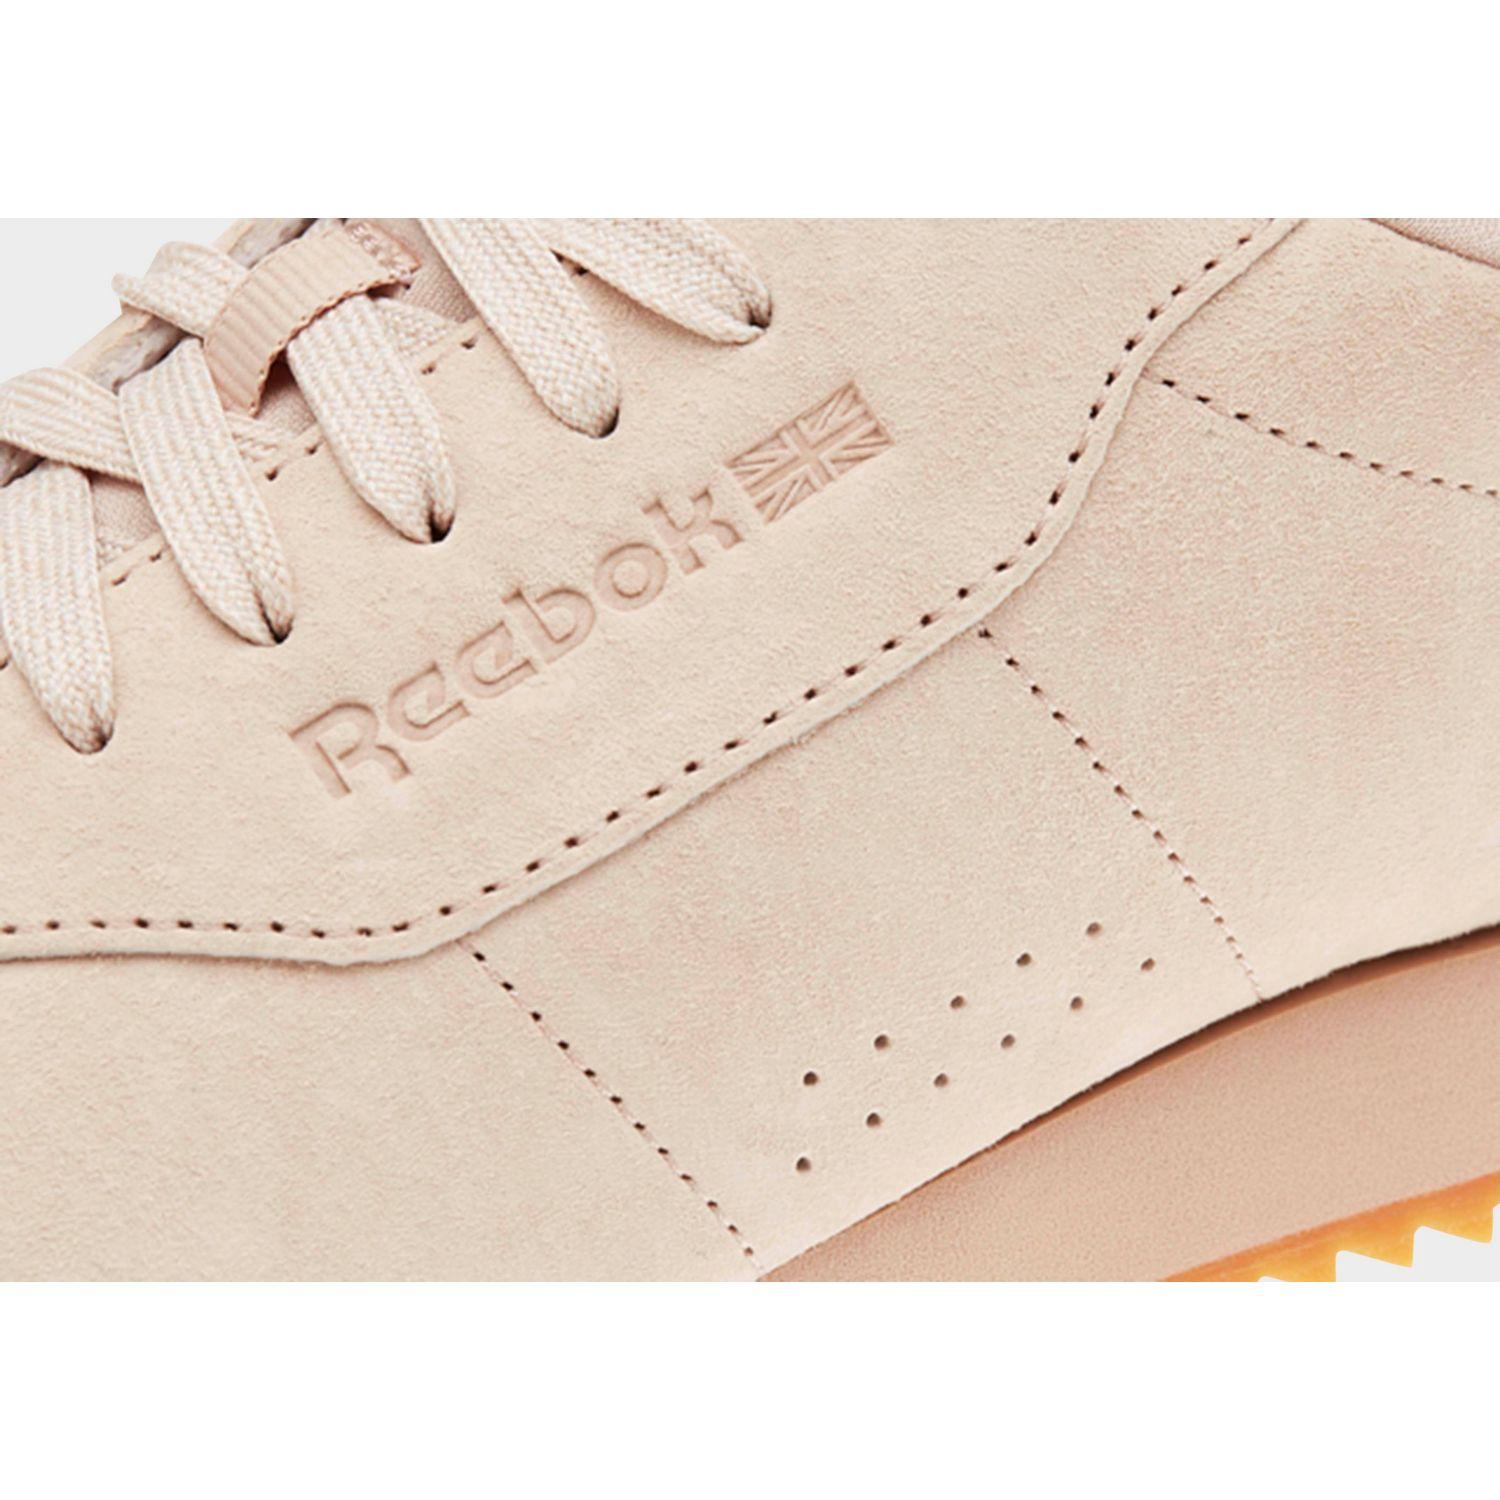 Reebok Leather Princess Ripple in Natural - Lyst